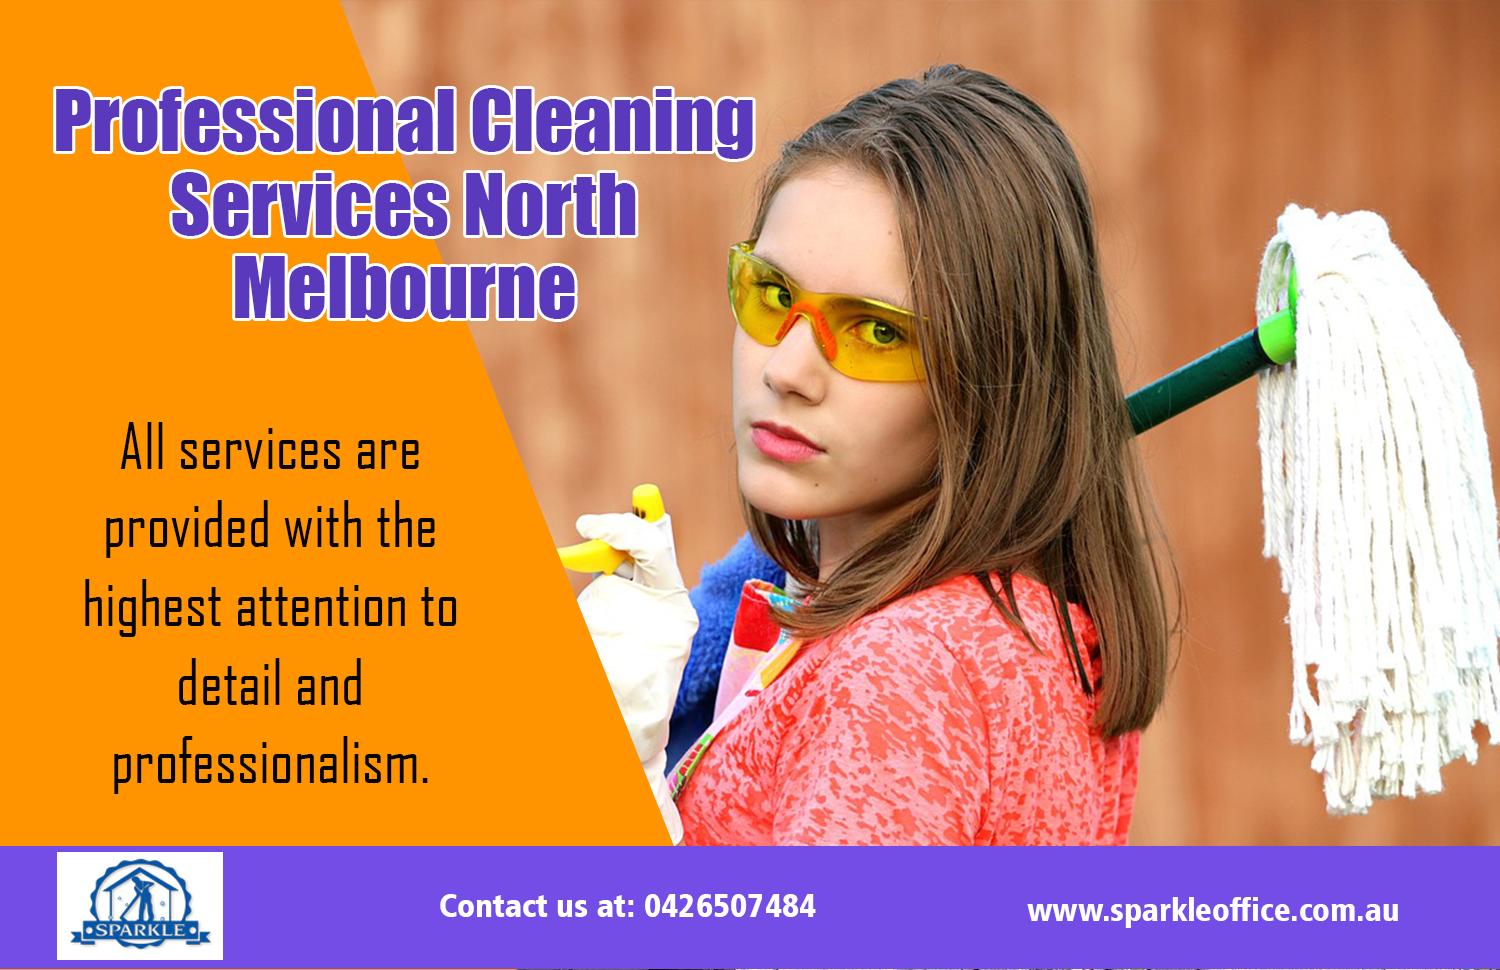 Professional Cleaning Services North Melbourne